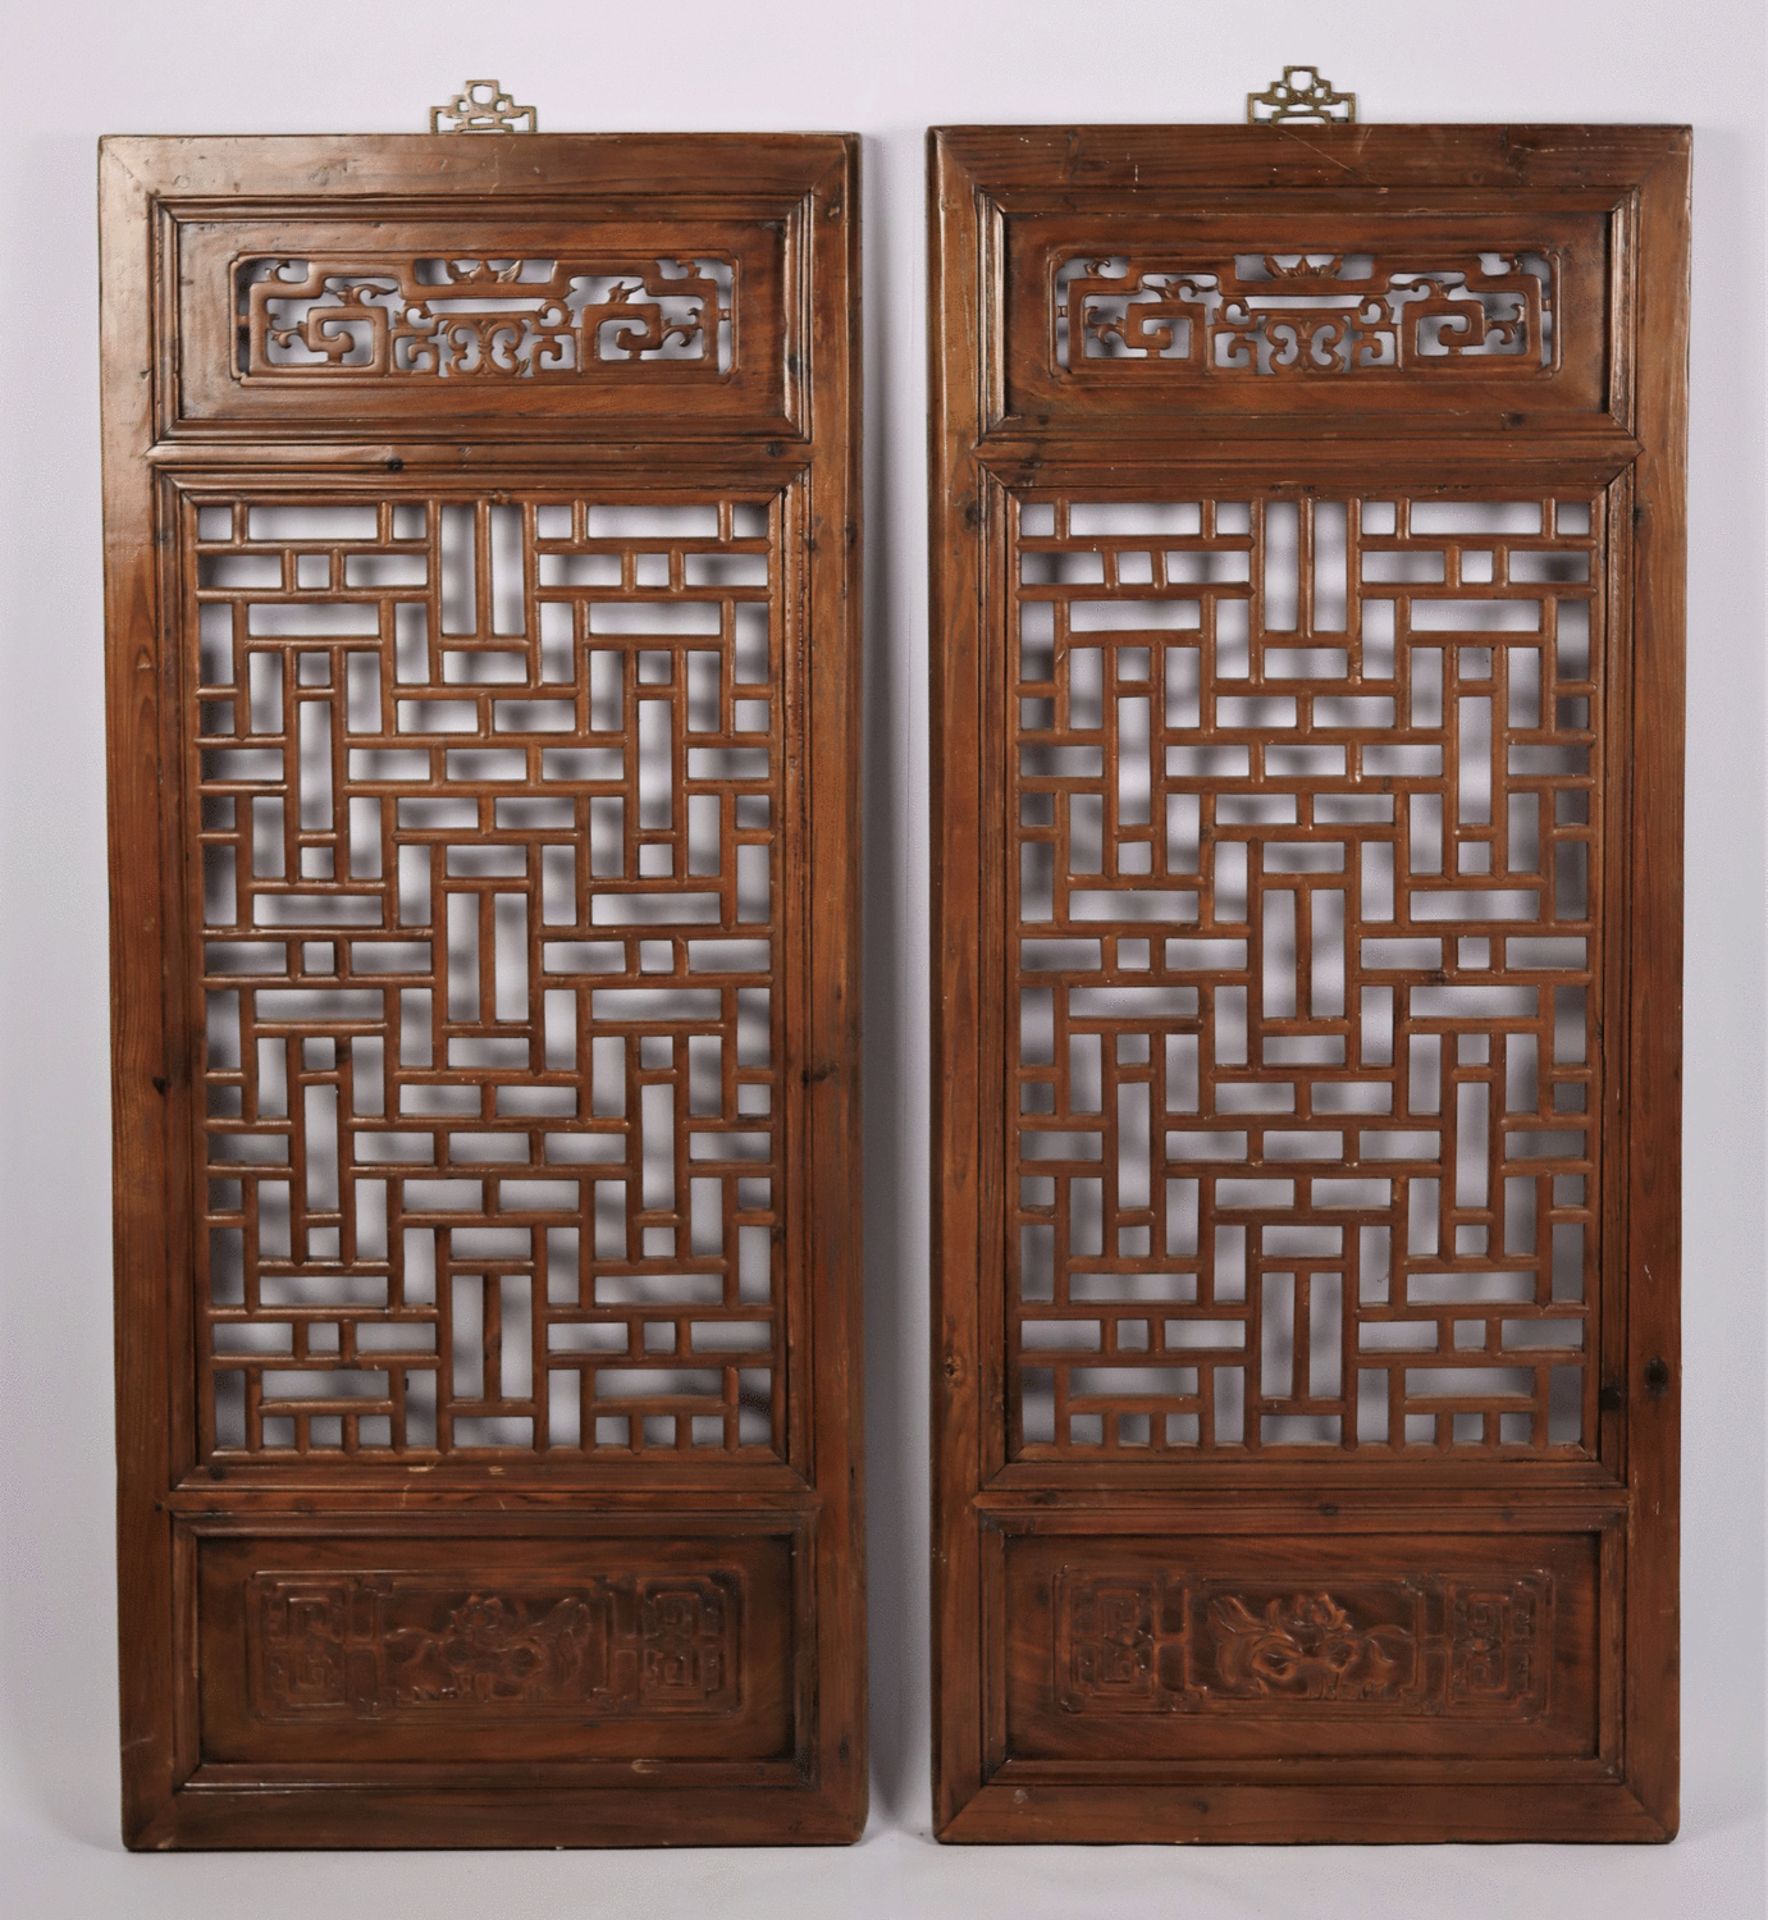 A pair of Chinese fretwork screens with carved motifs. Qing Dynasty, 19th Century